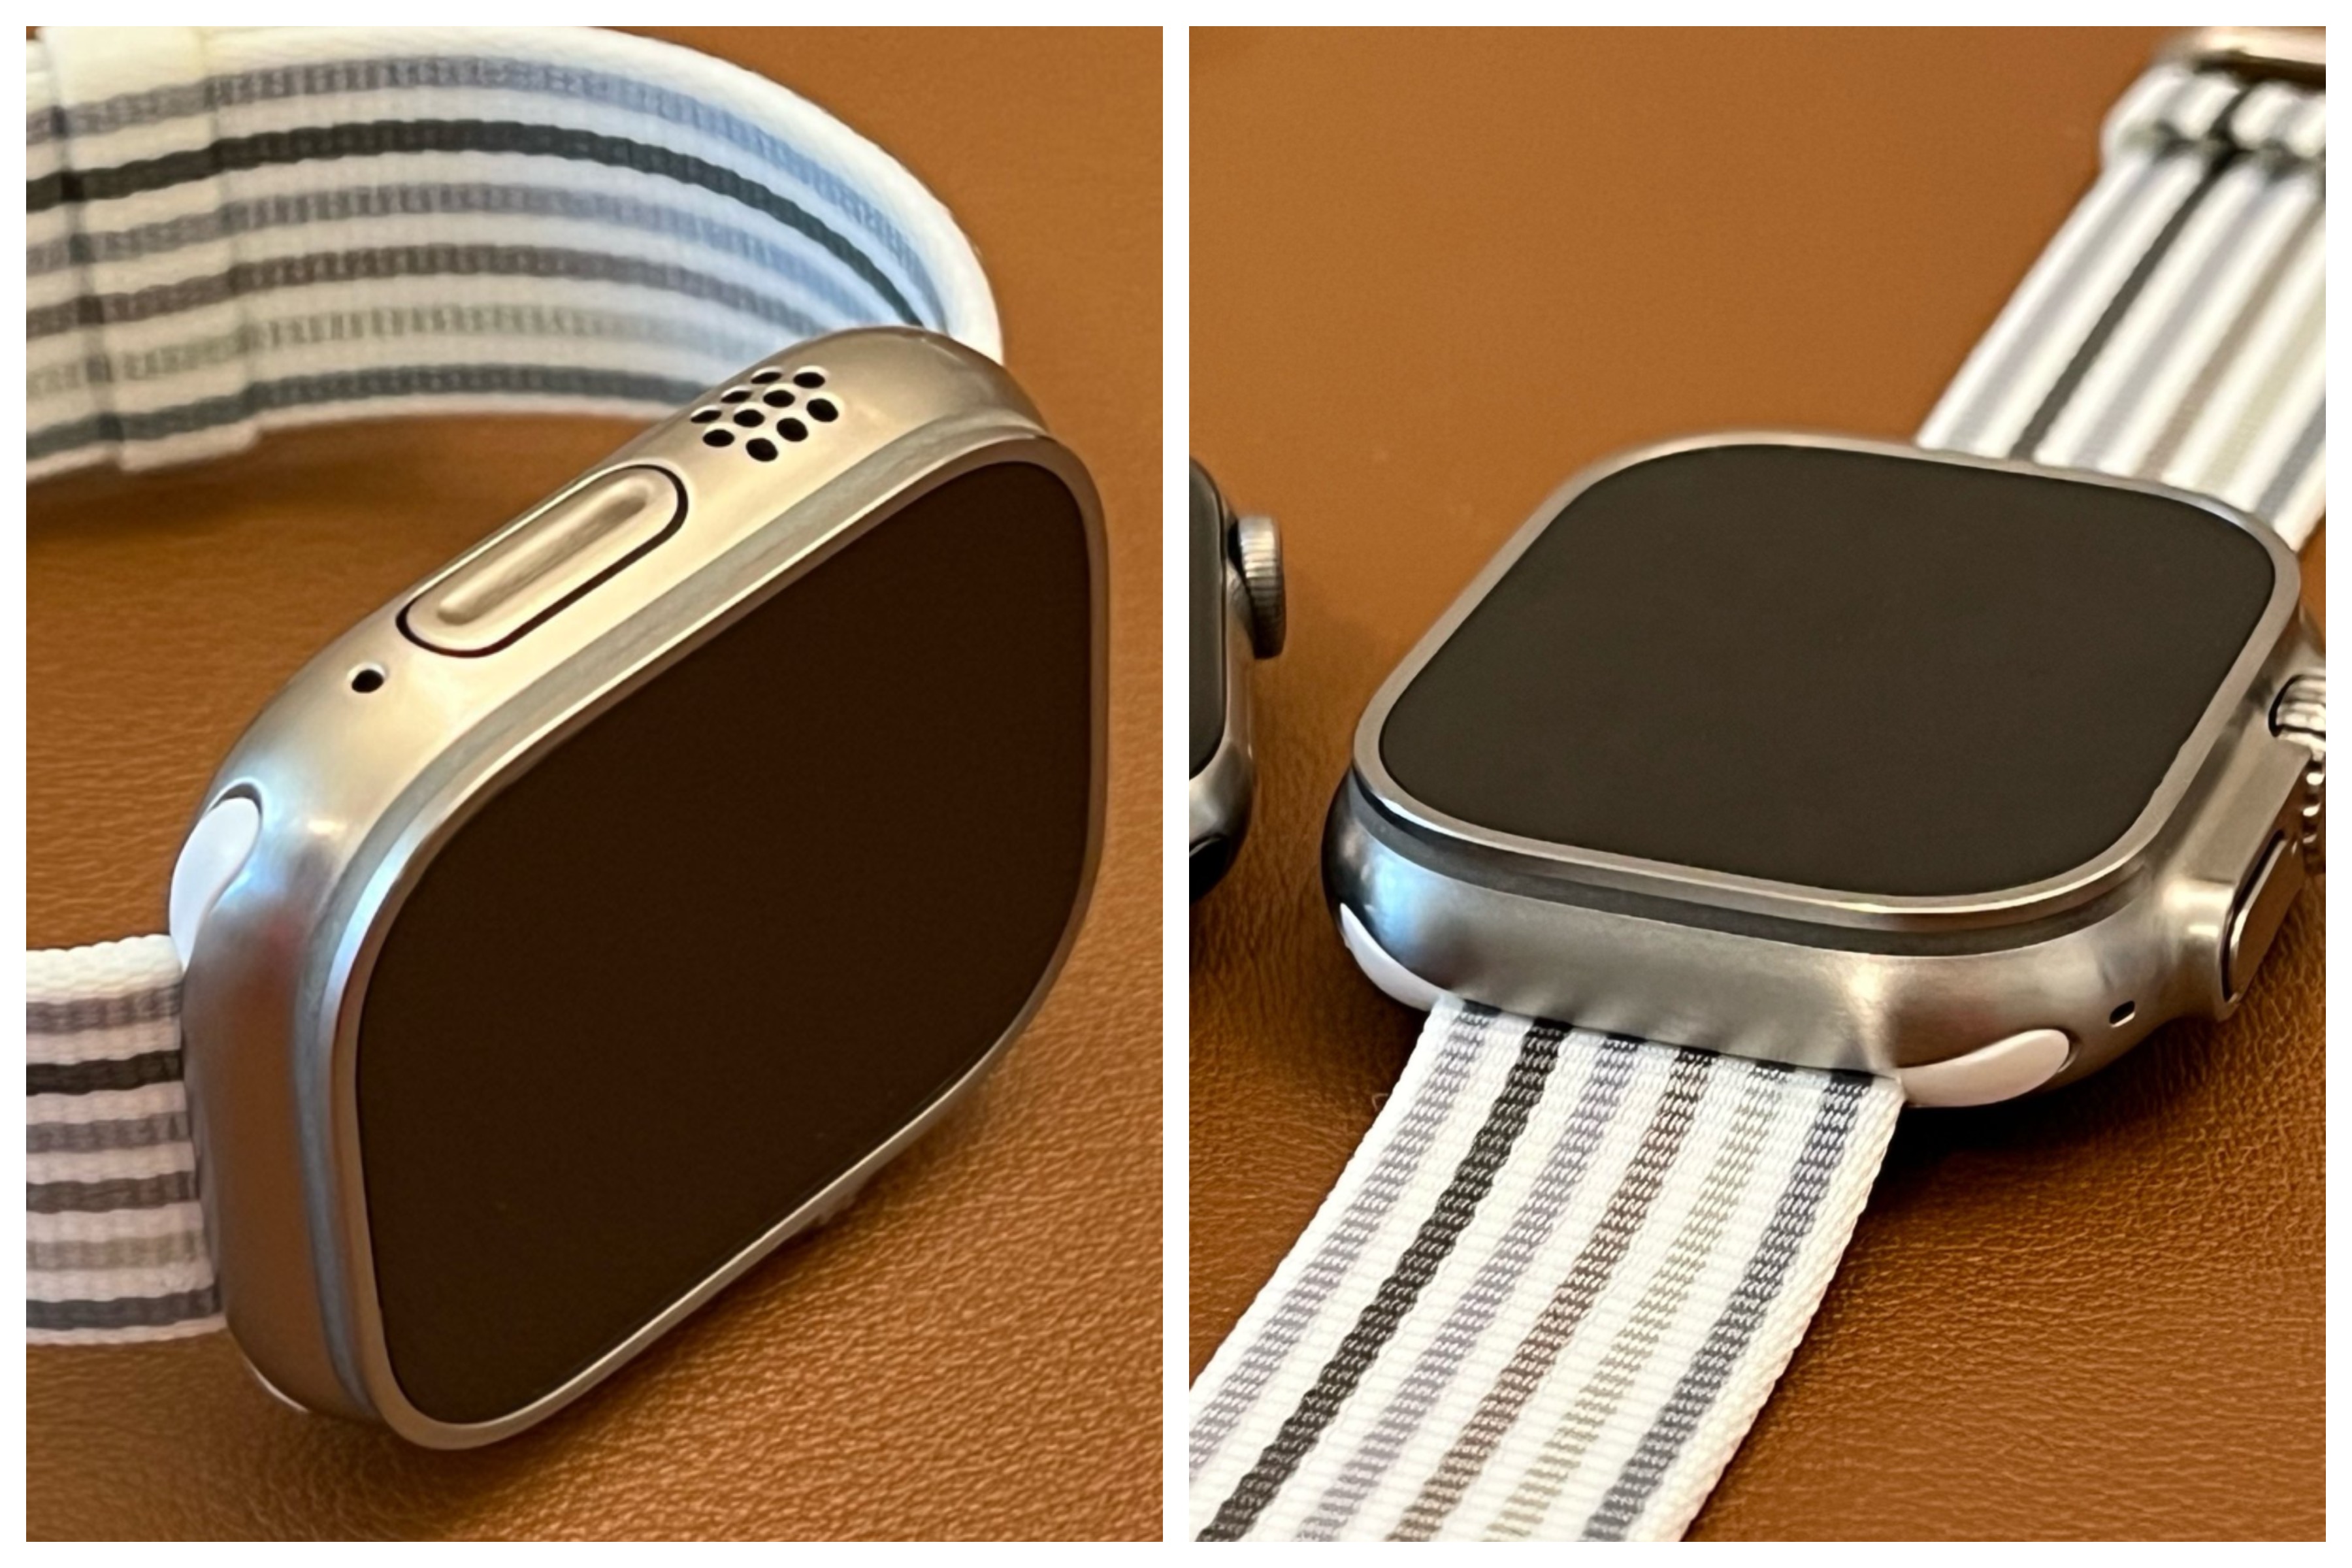 Removing the paint on Apple Watch Ultra.